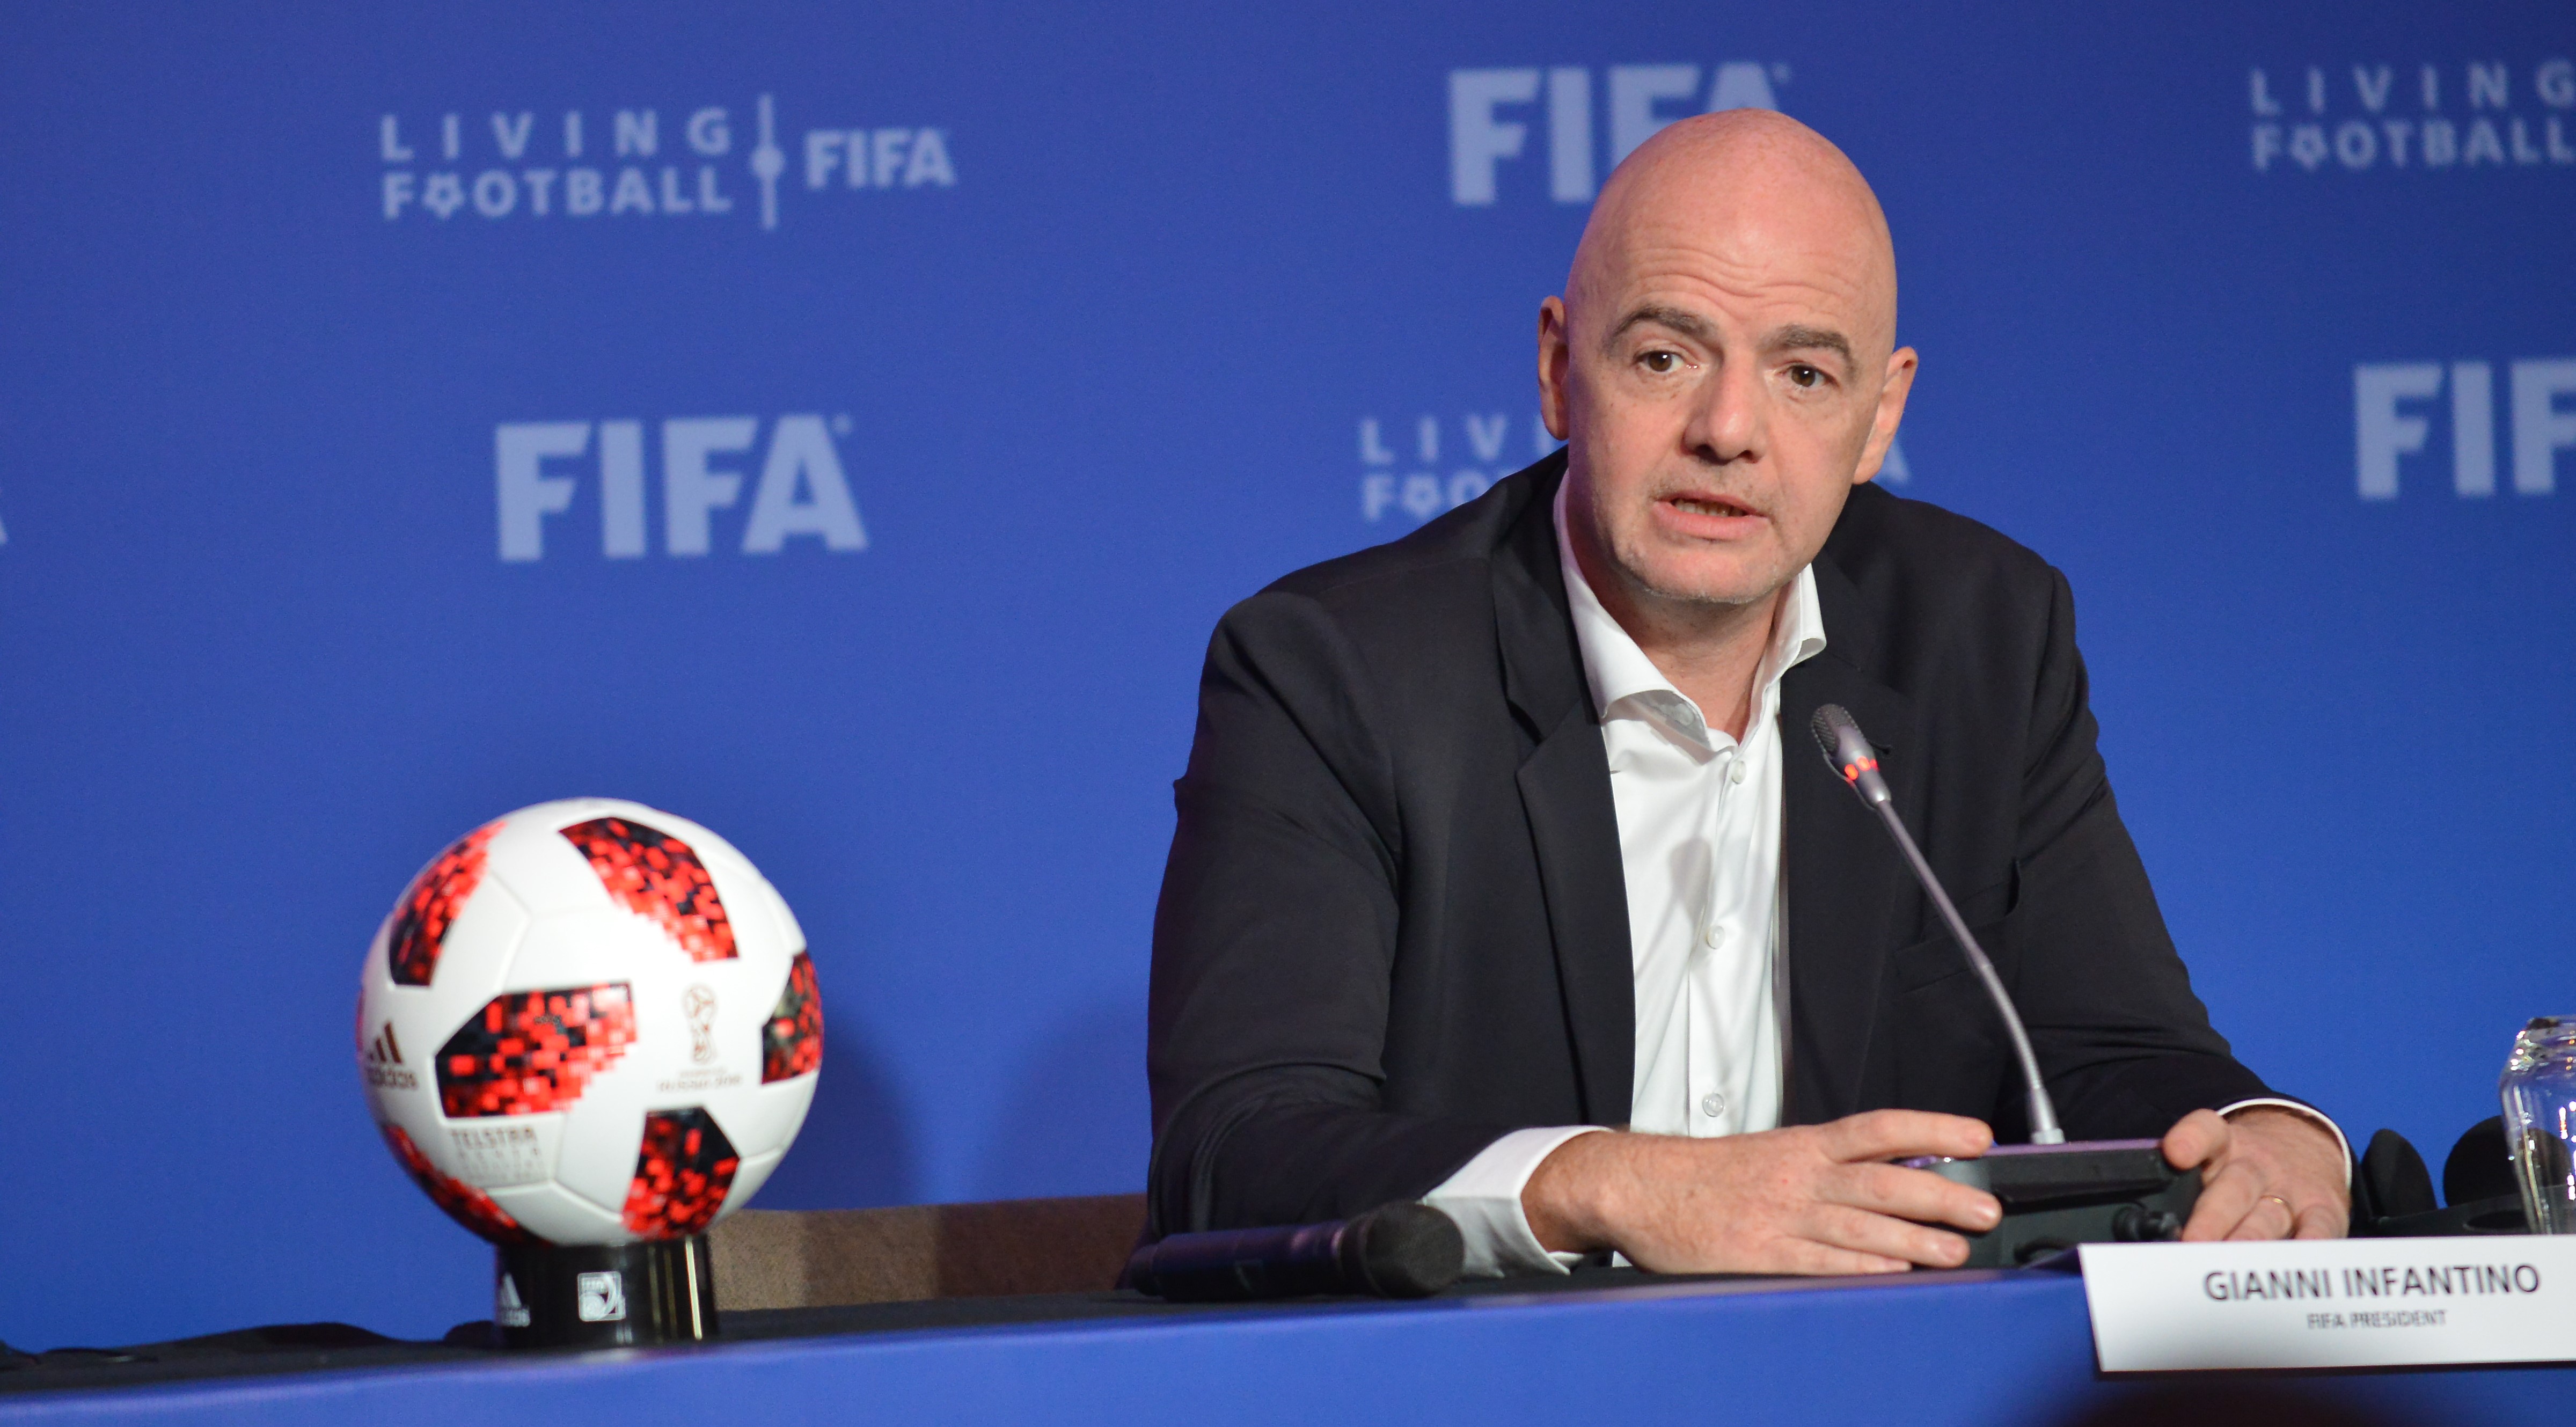 FIFA mostly wins big but loses some trust at Qatar World Cup